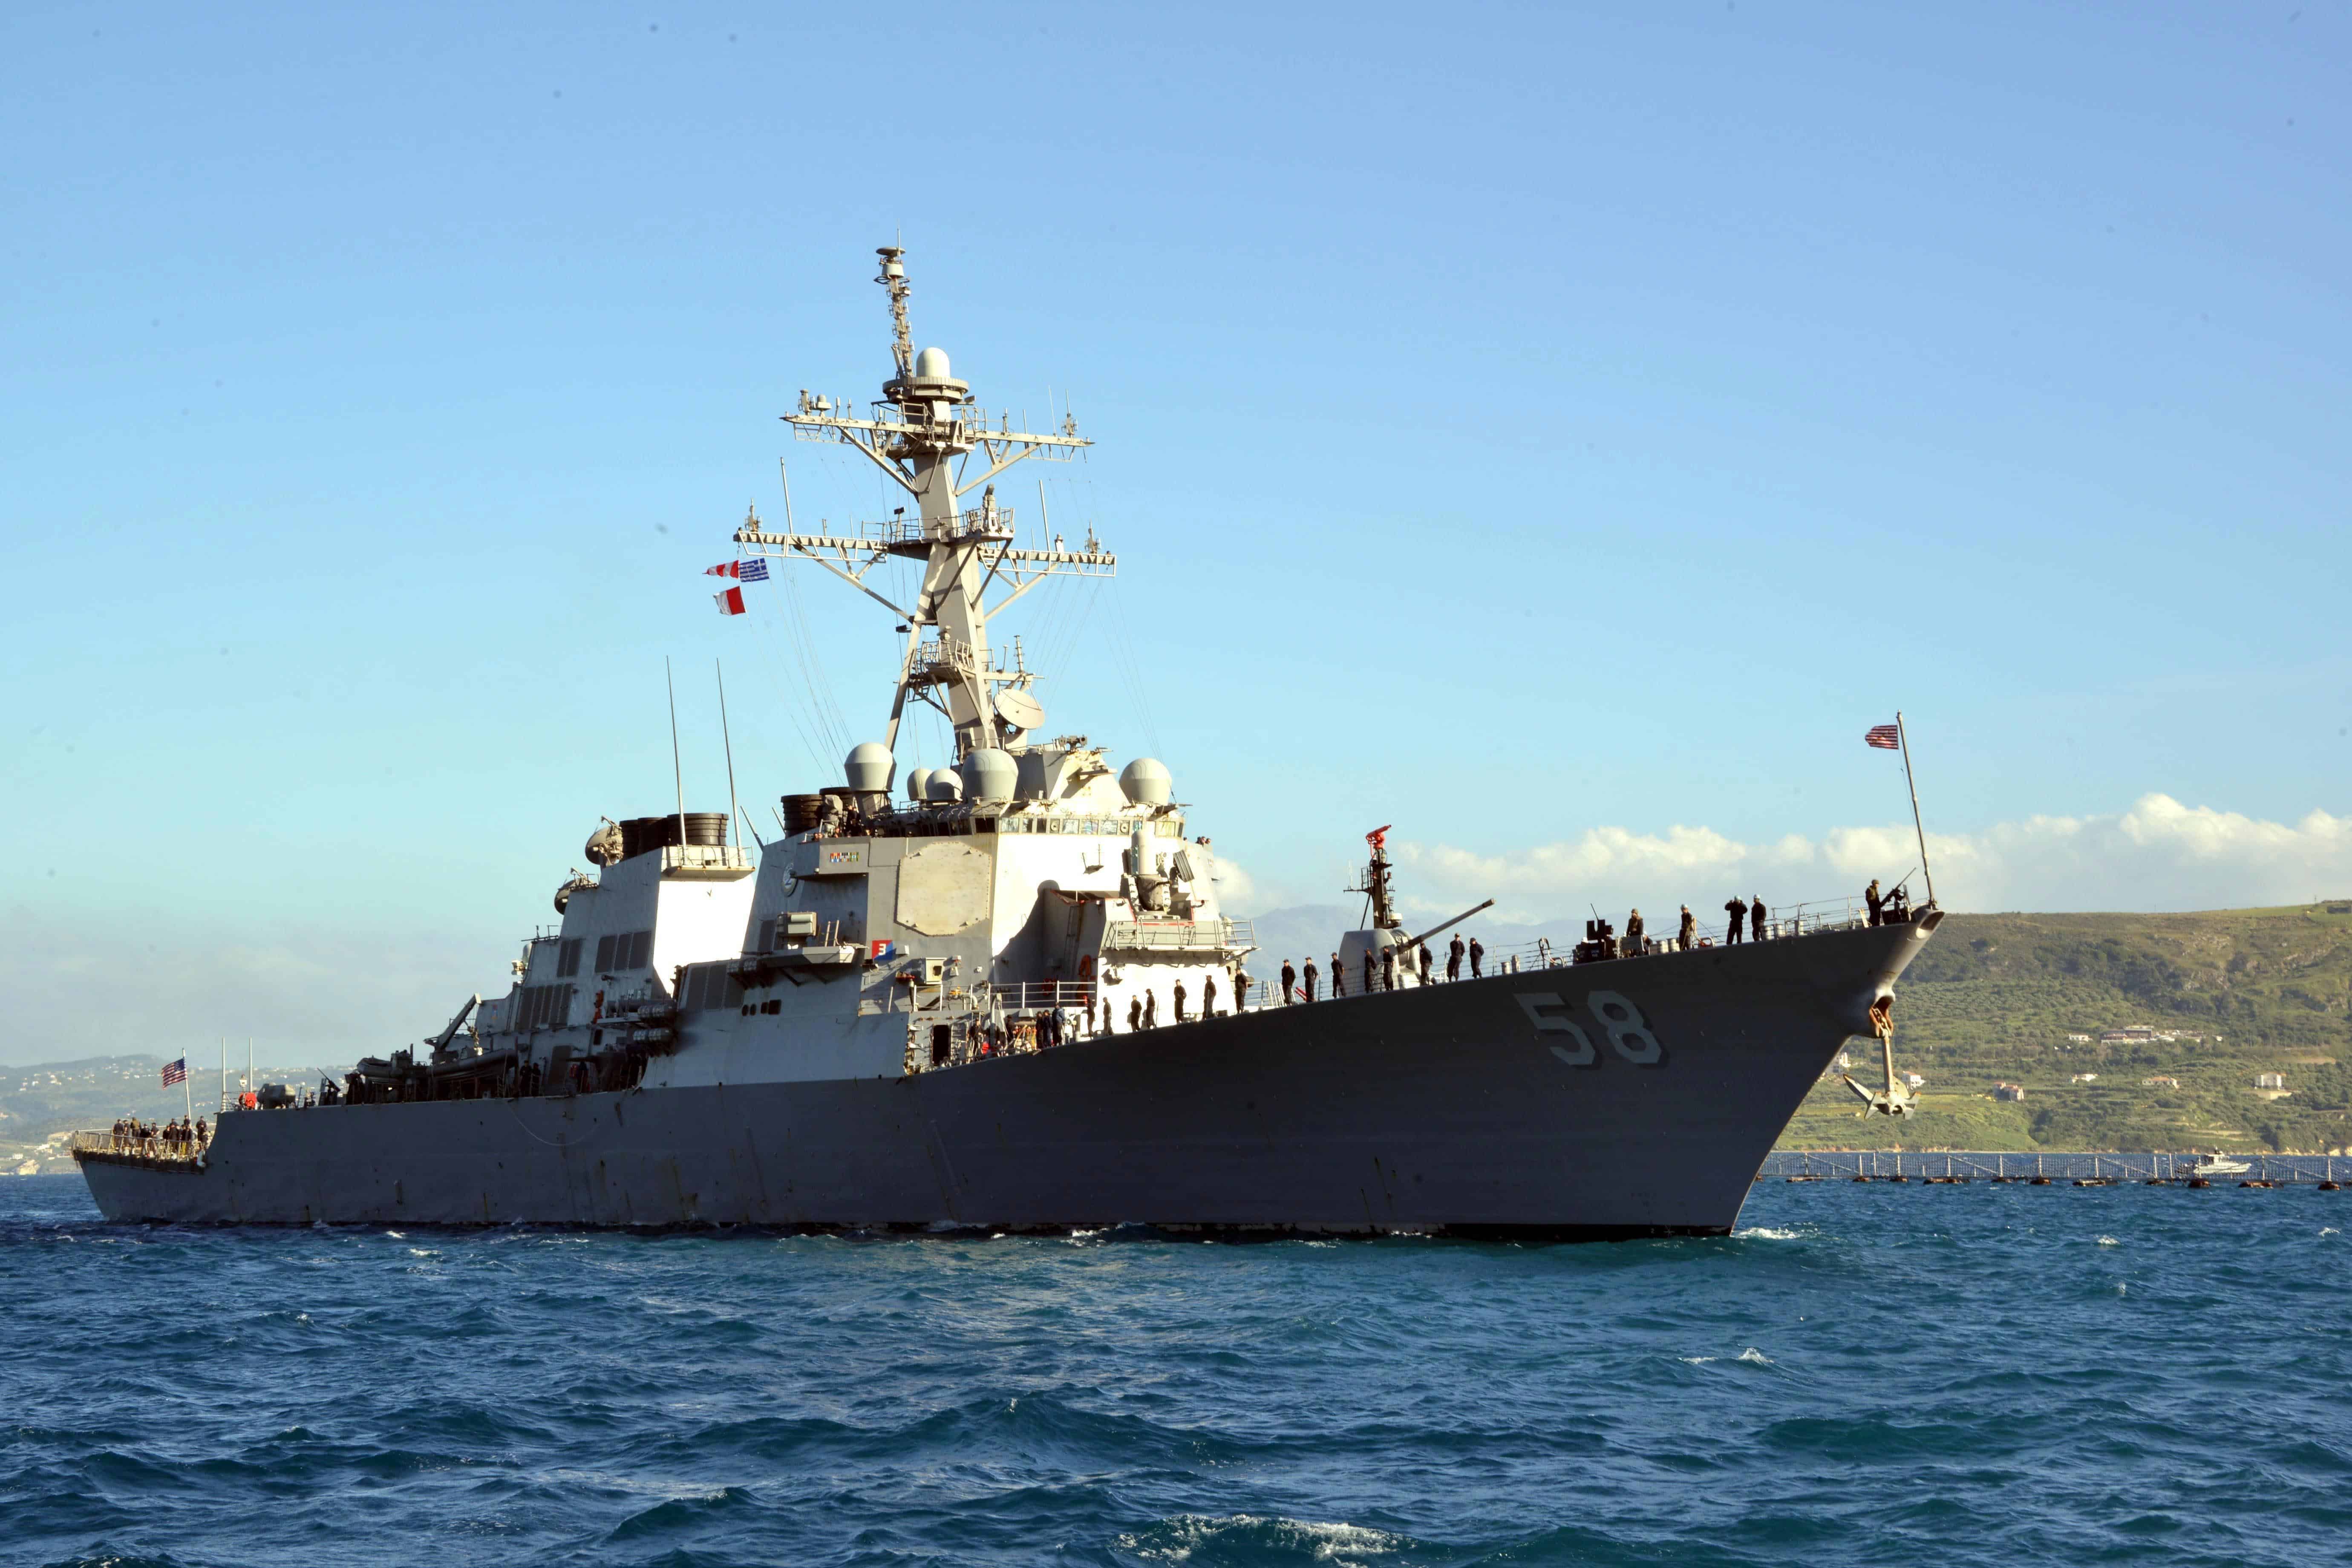 150429-N-JE719-080 SOUDA BAY, Greece (April 29, 2015) USS Laboon (DDG-58) sails into Souda Bay, Greece, during a scheduled port visit April 29. Laboon, an Arleigh Burke-class guided-missile destroyer, homeported in Norfolk, is participating in Exercise Noble Dina 2015